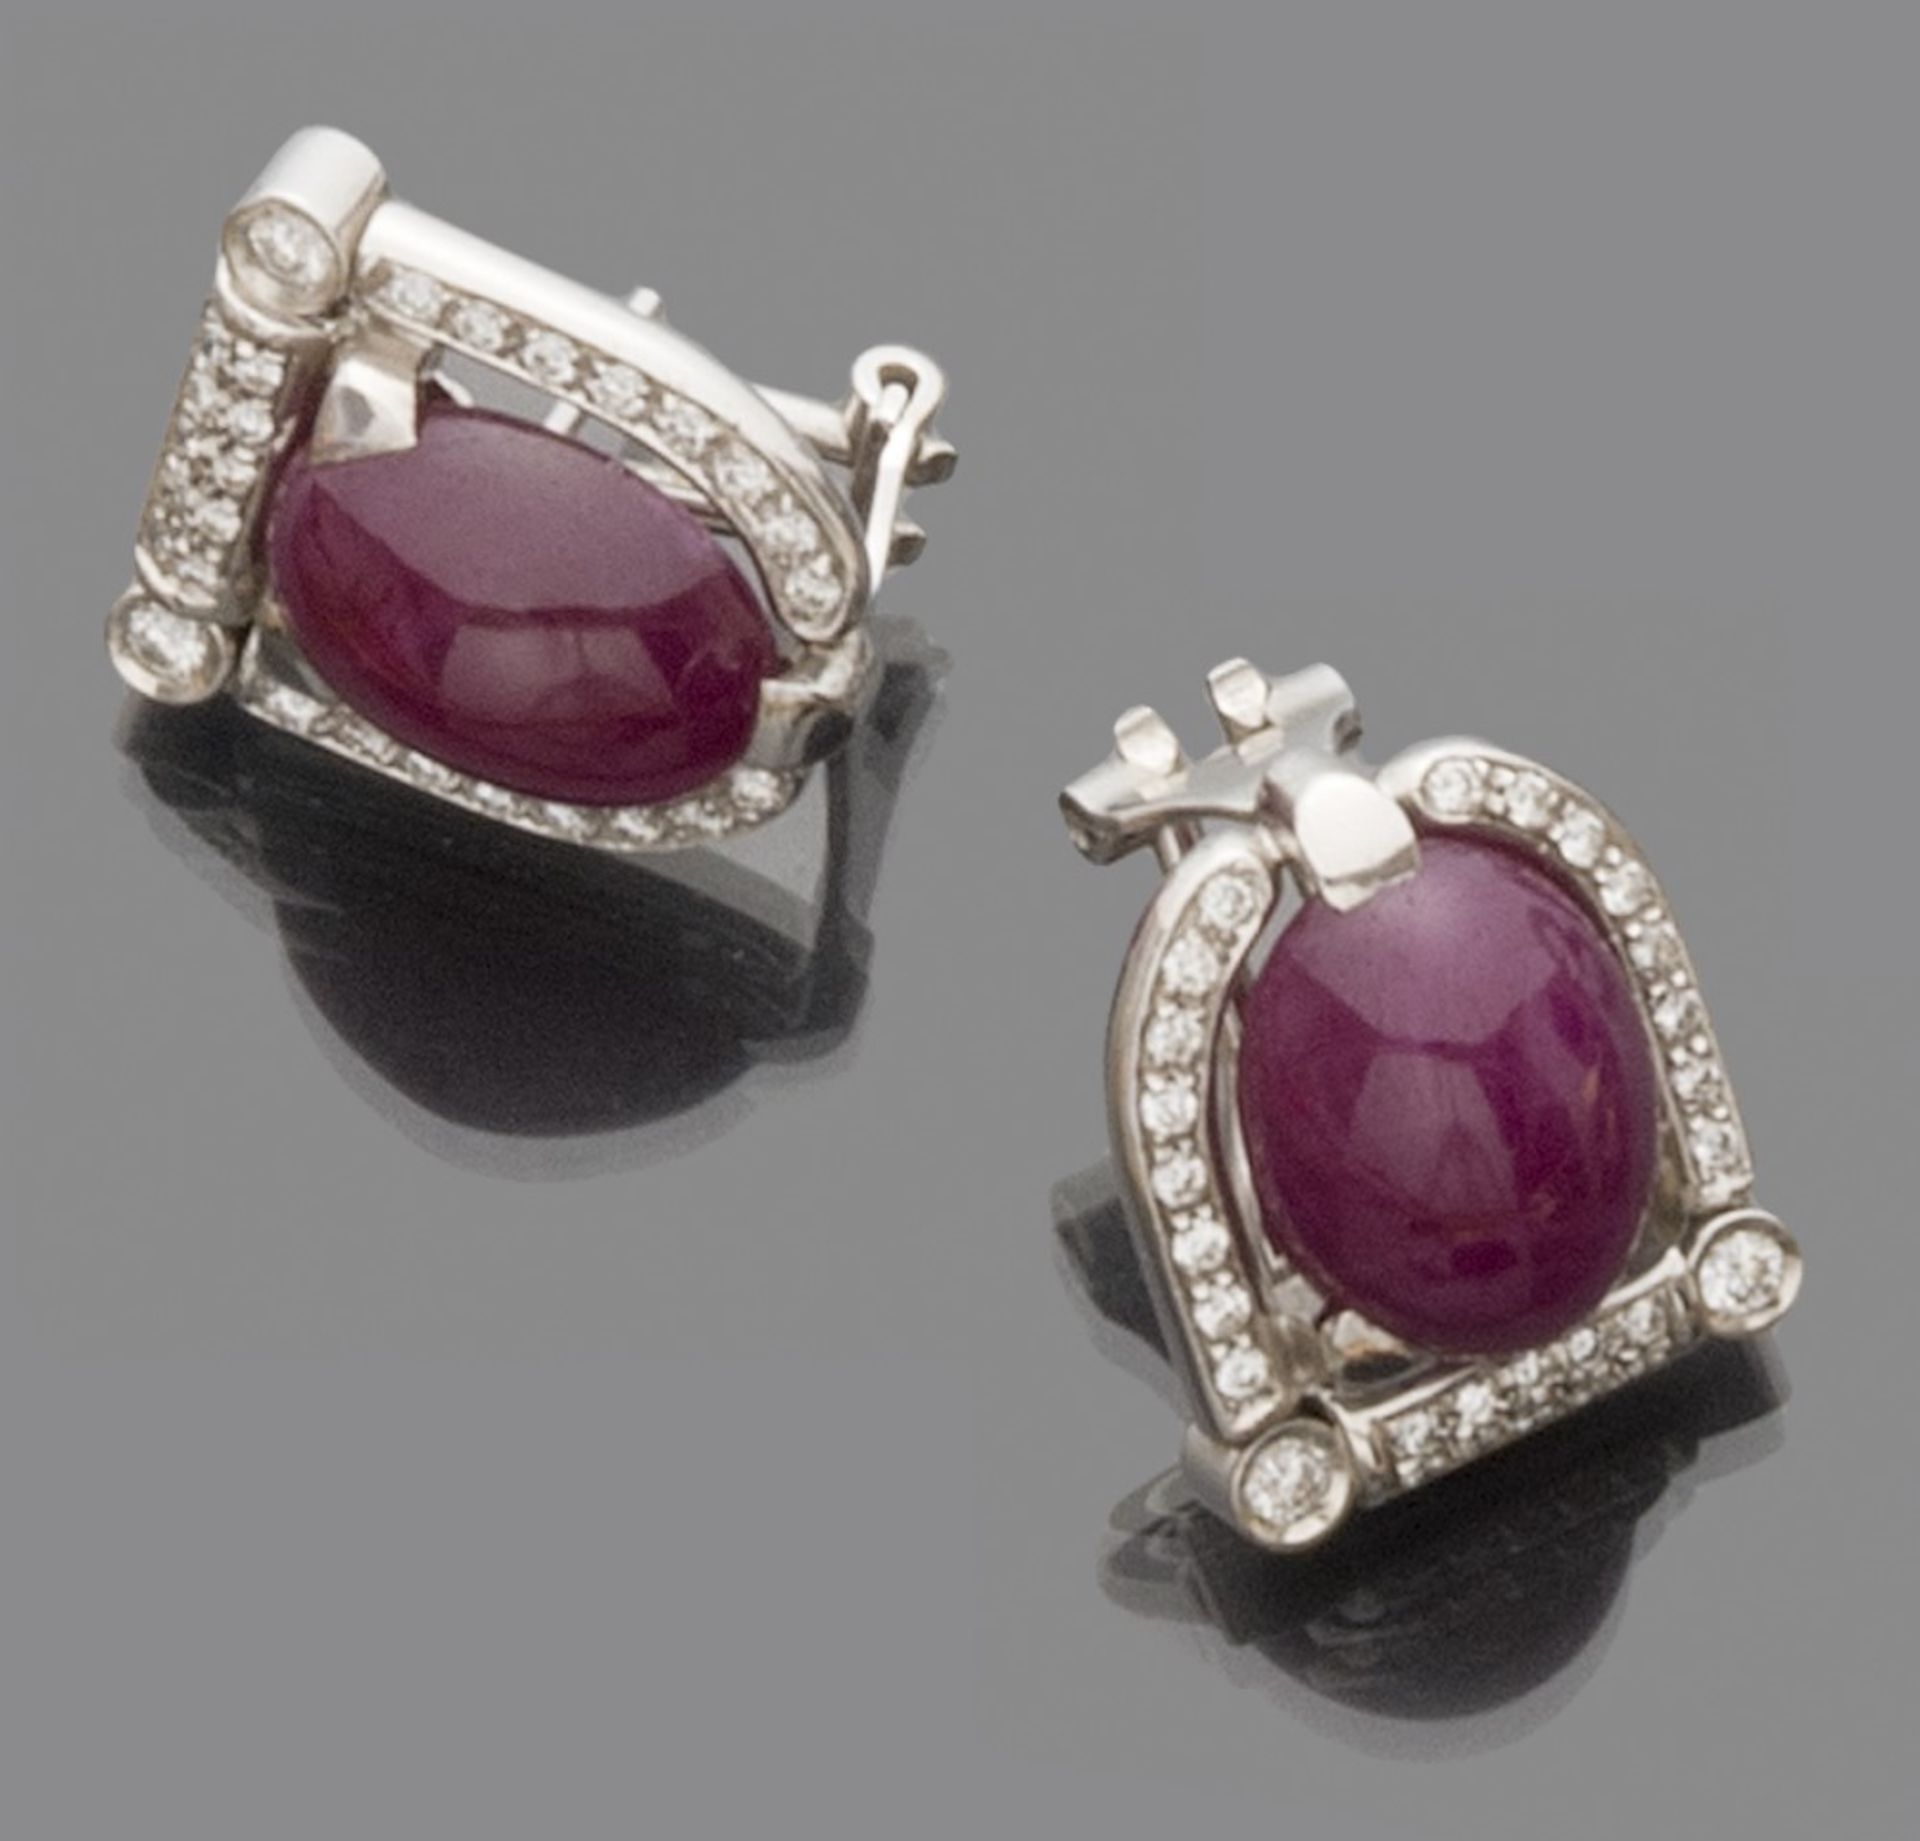 COUPLE OF EARRINGS in 18 kt white gold, with a bell shape with cabochon rubies and surrounding